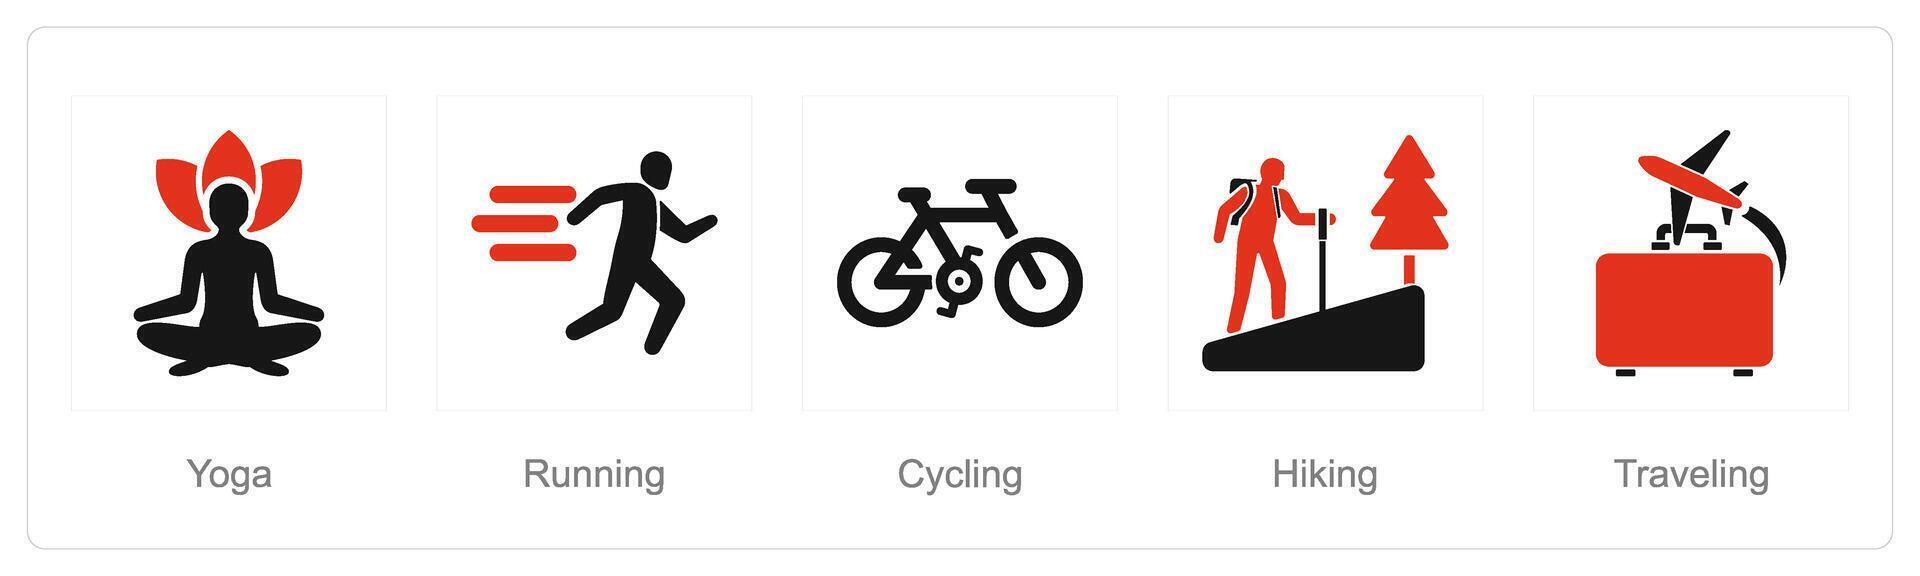 A set of 5 Hobby icons as yoga, running, cycling vector